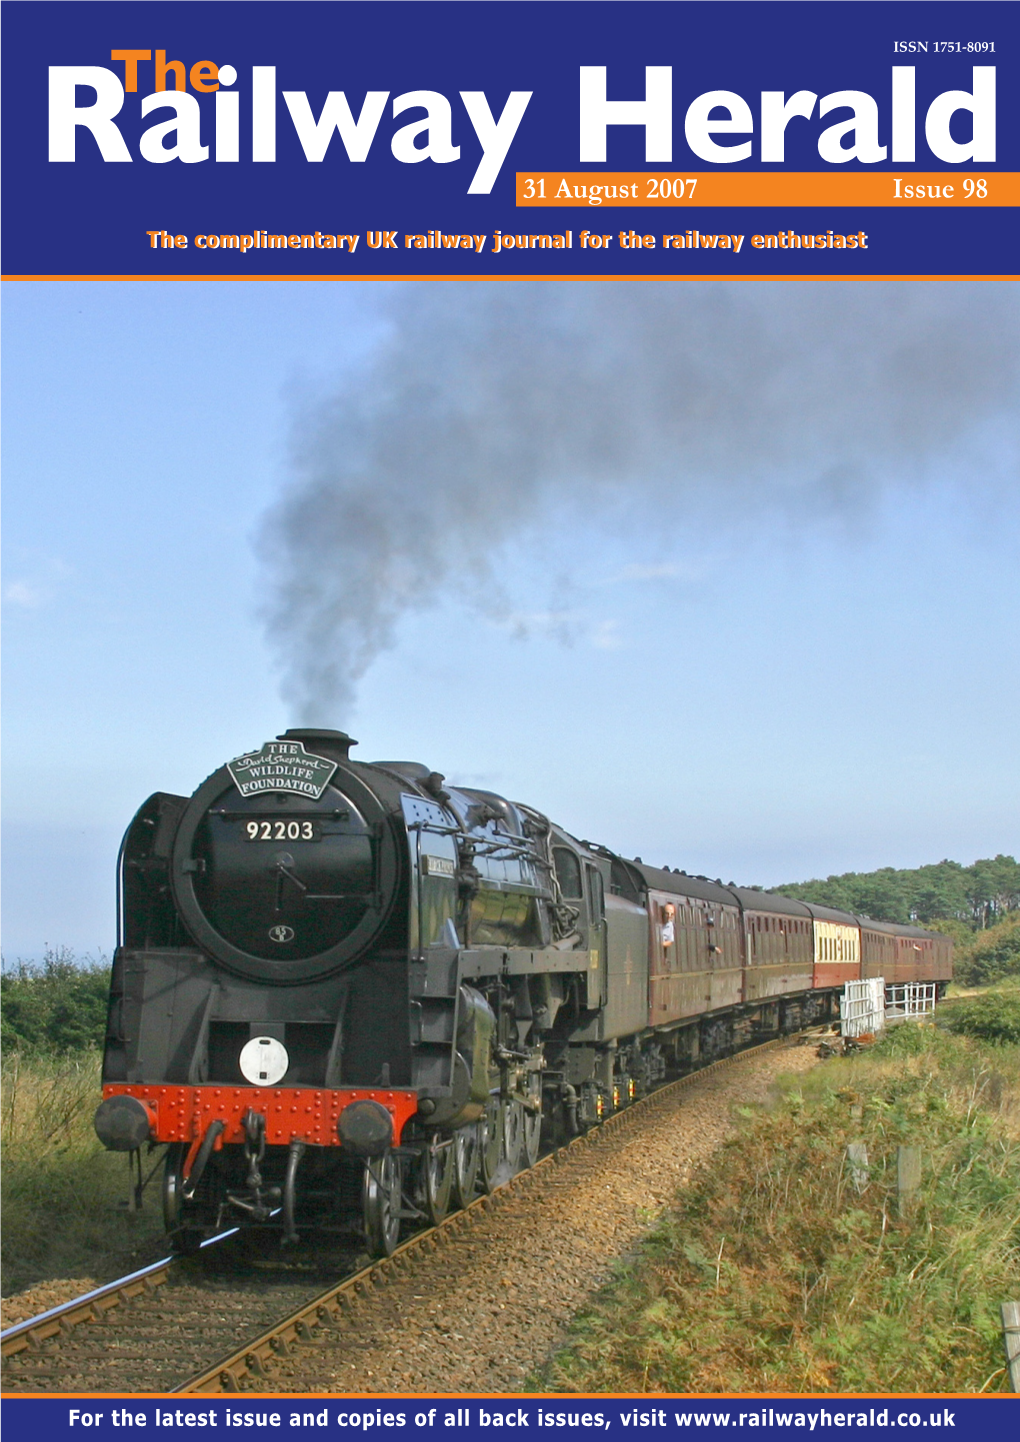 31 August 2007 Issue 98